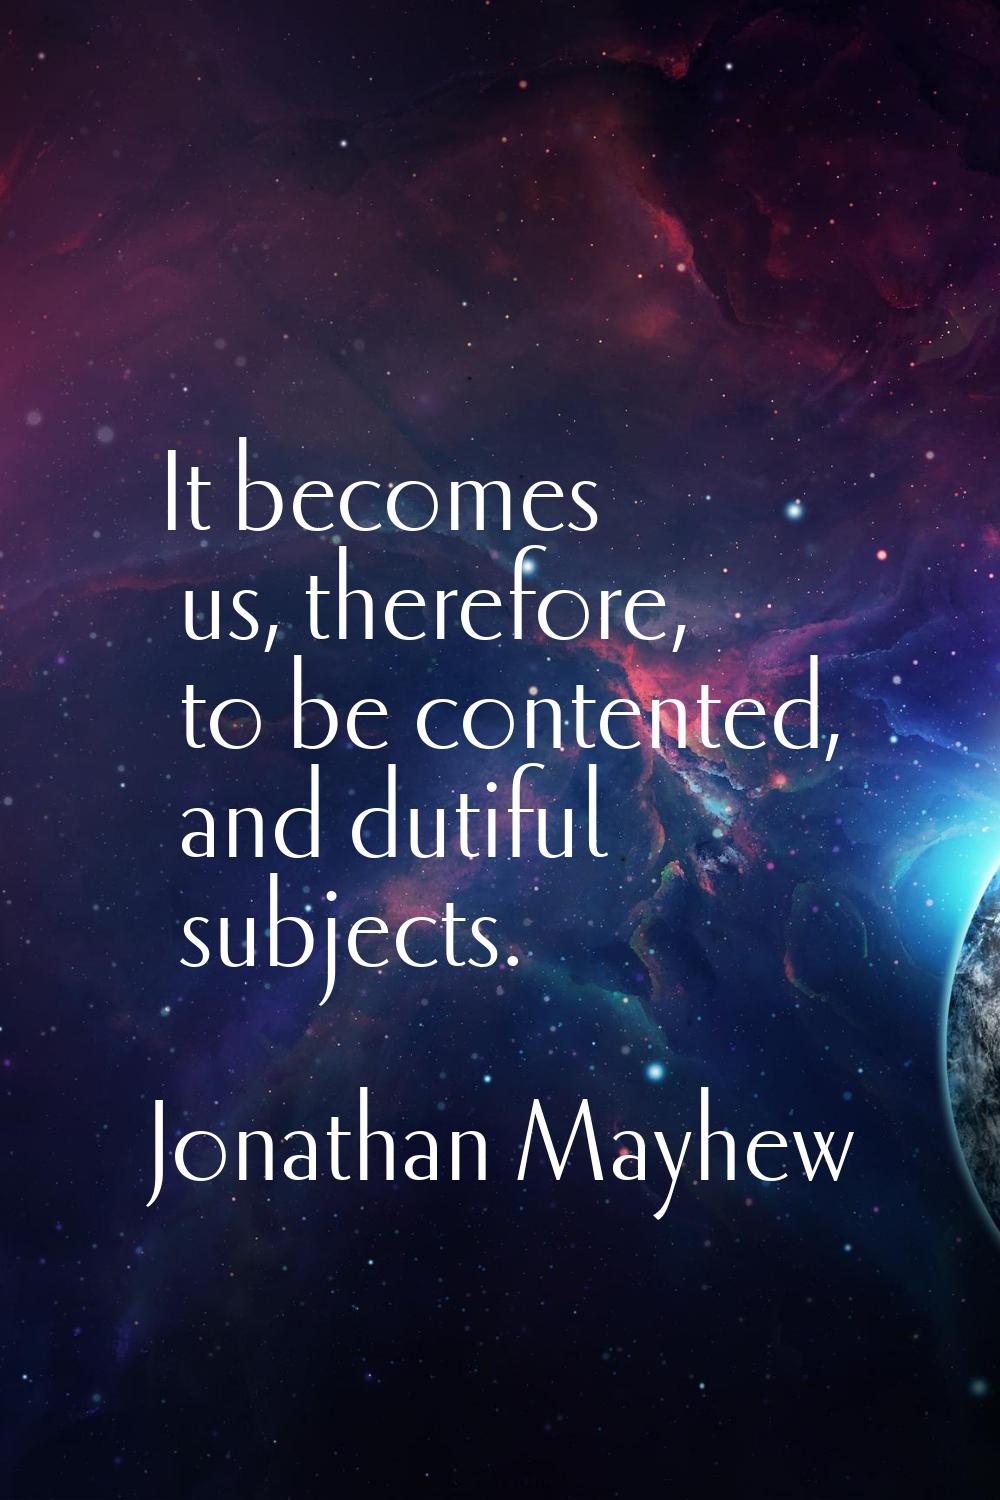 It becomes us, therefore, to be contented, and dutiful subjects.